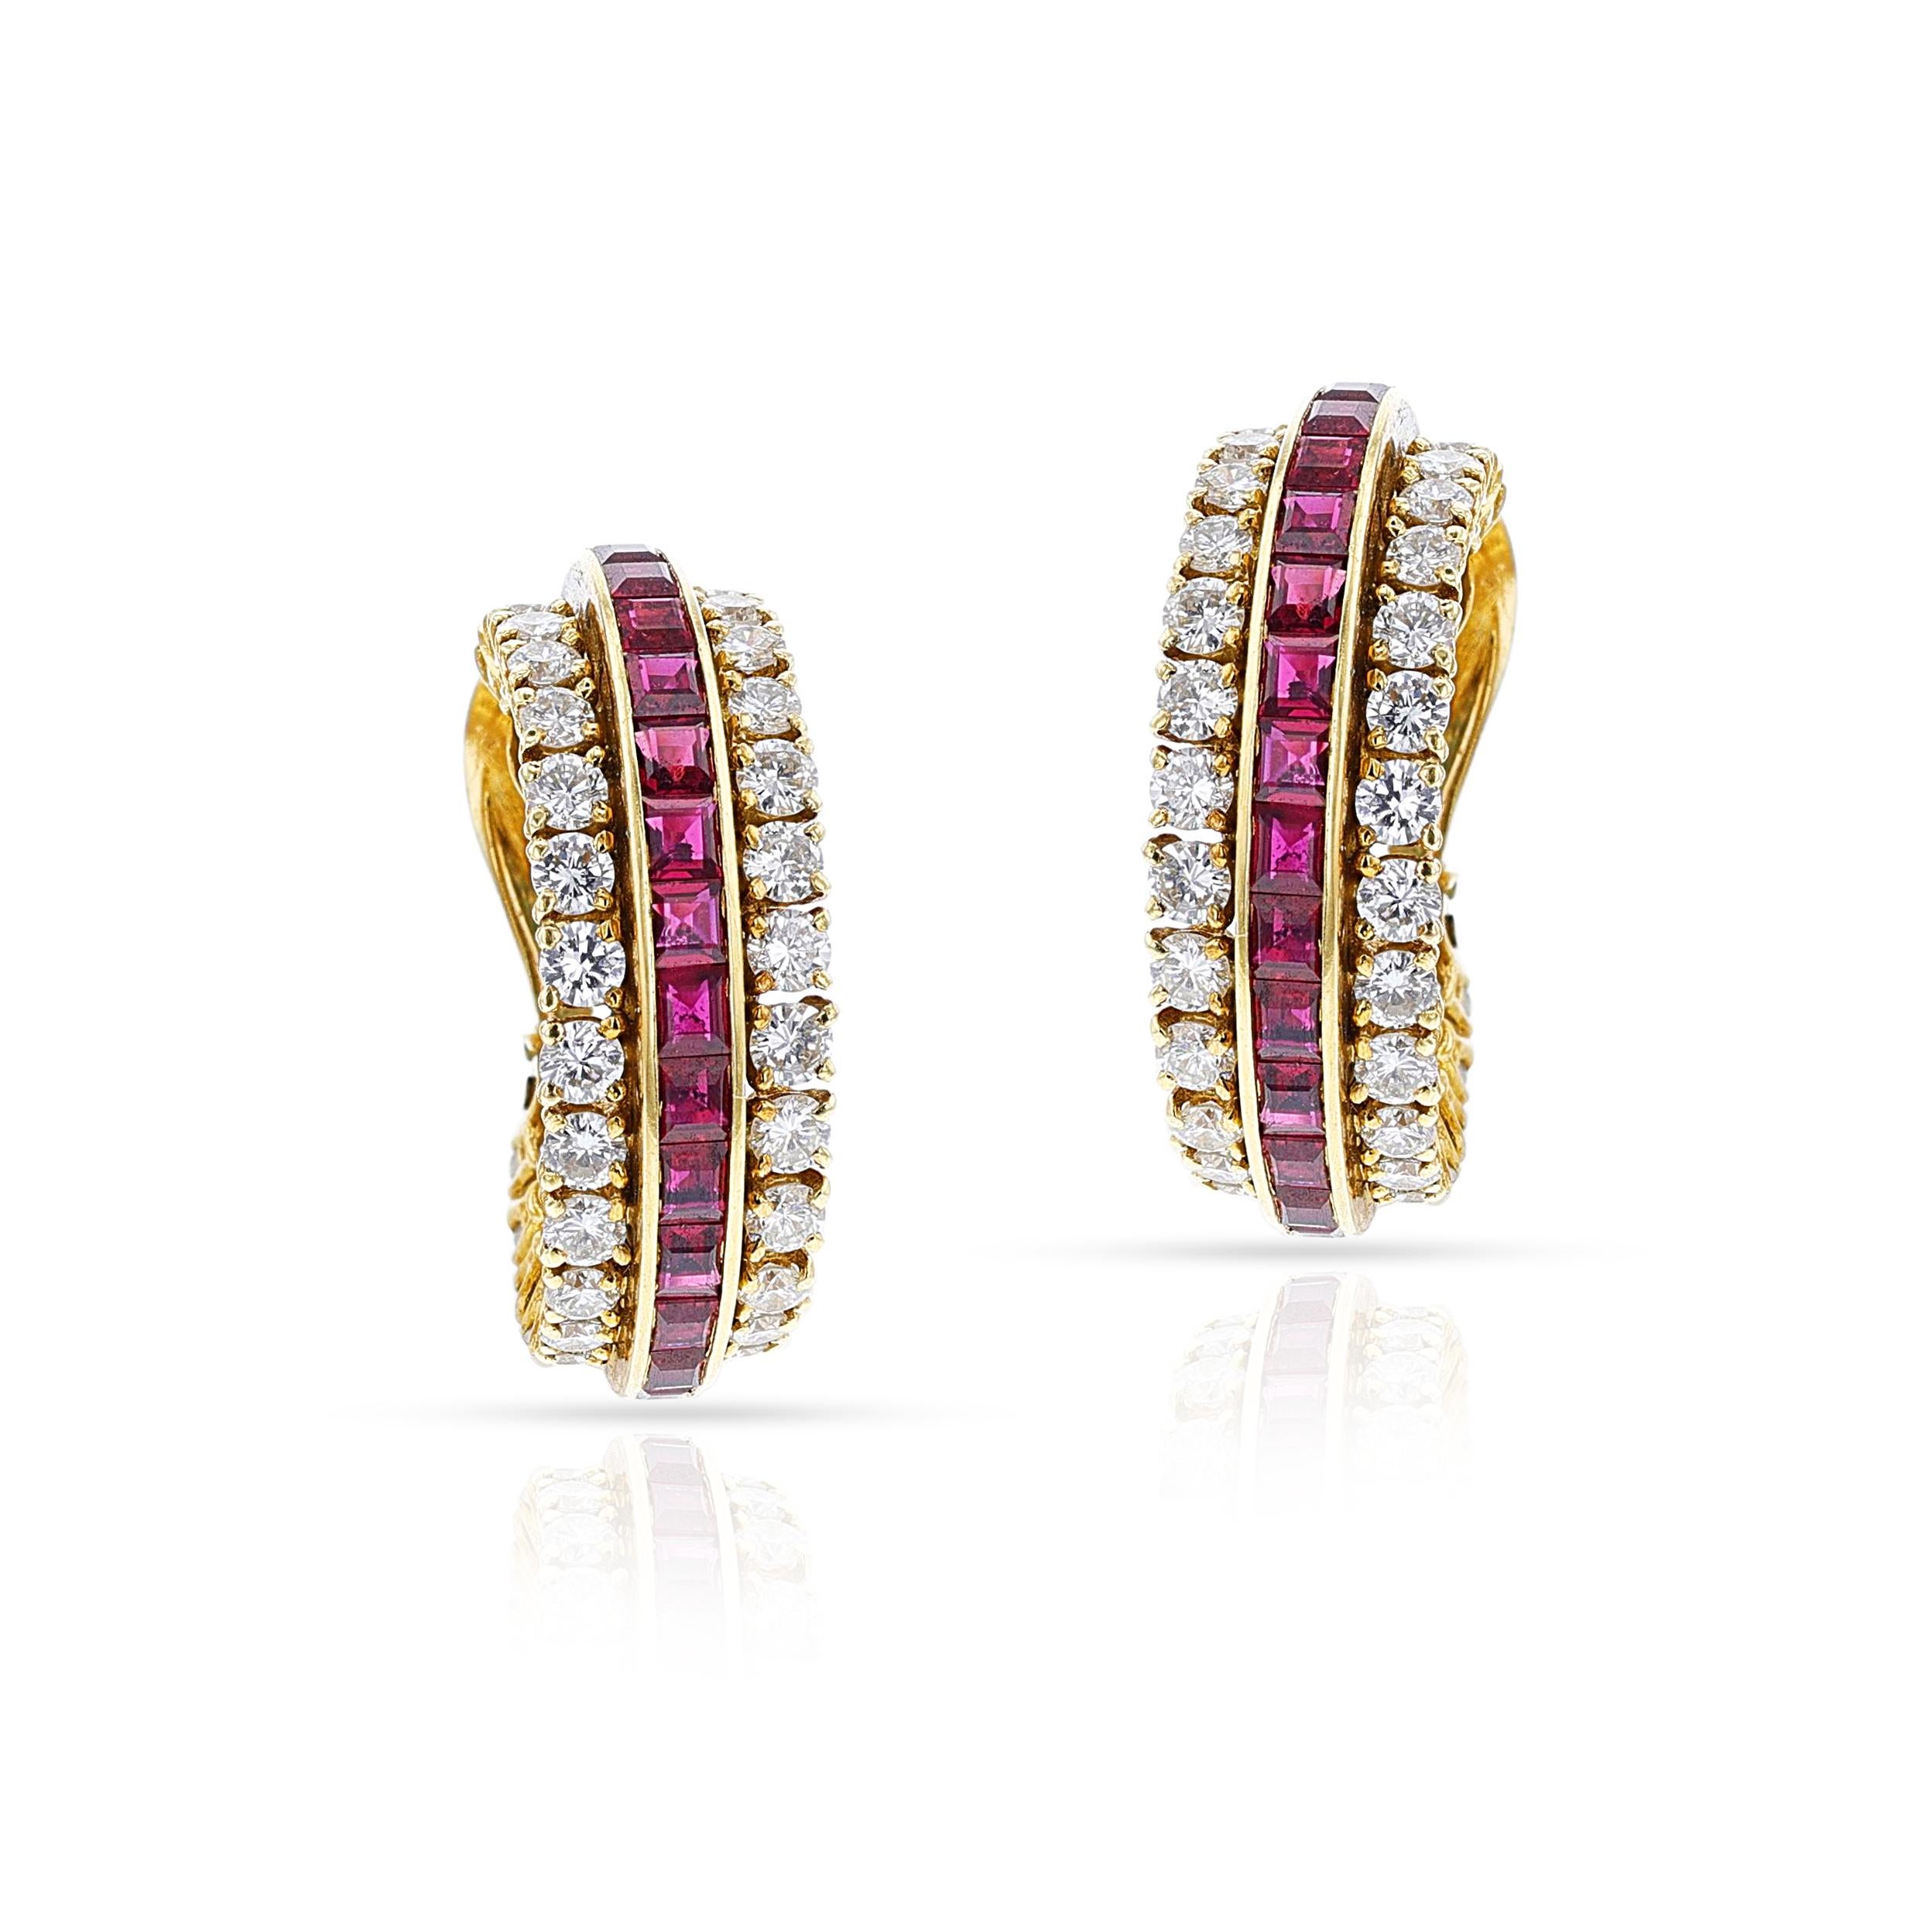 A pair of Van Cleef & Arpels Ruby and Diamond Half Hoop Earrings made in 18k Gold. The earrings are channel set with calibré-cut rubies surrounded with round diamonds. The length is 1 inch. The diamonds weigh appx. 2.75 carats and are of G-H color